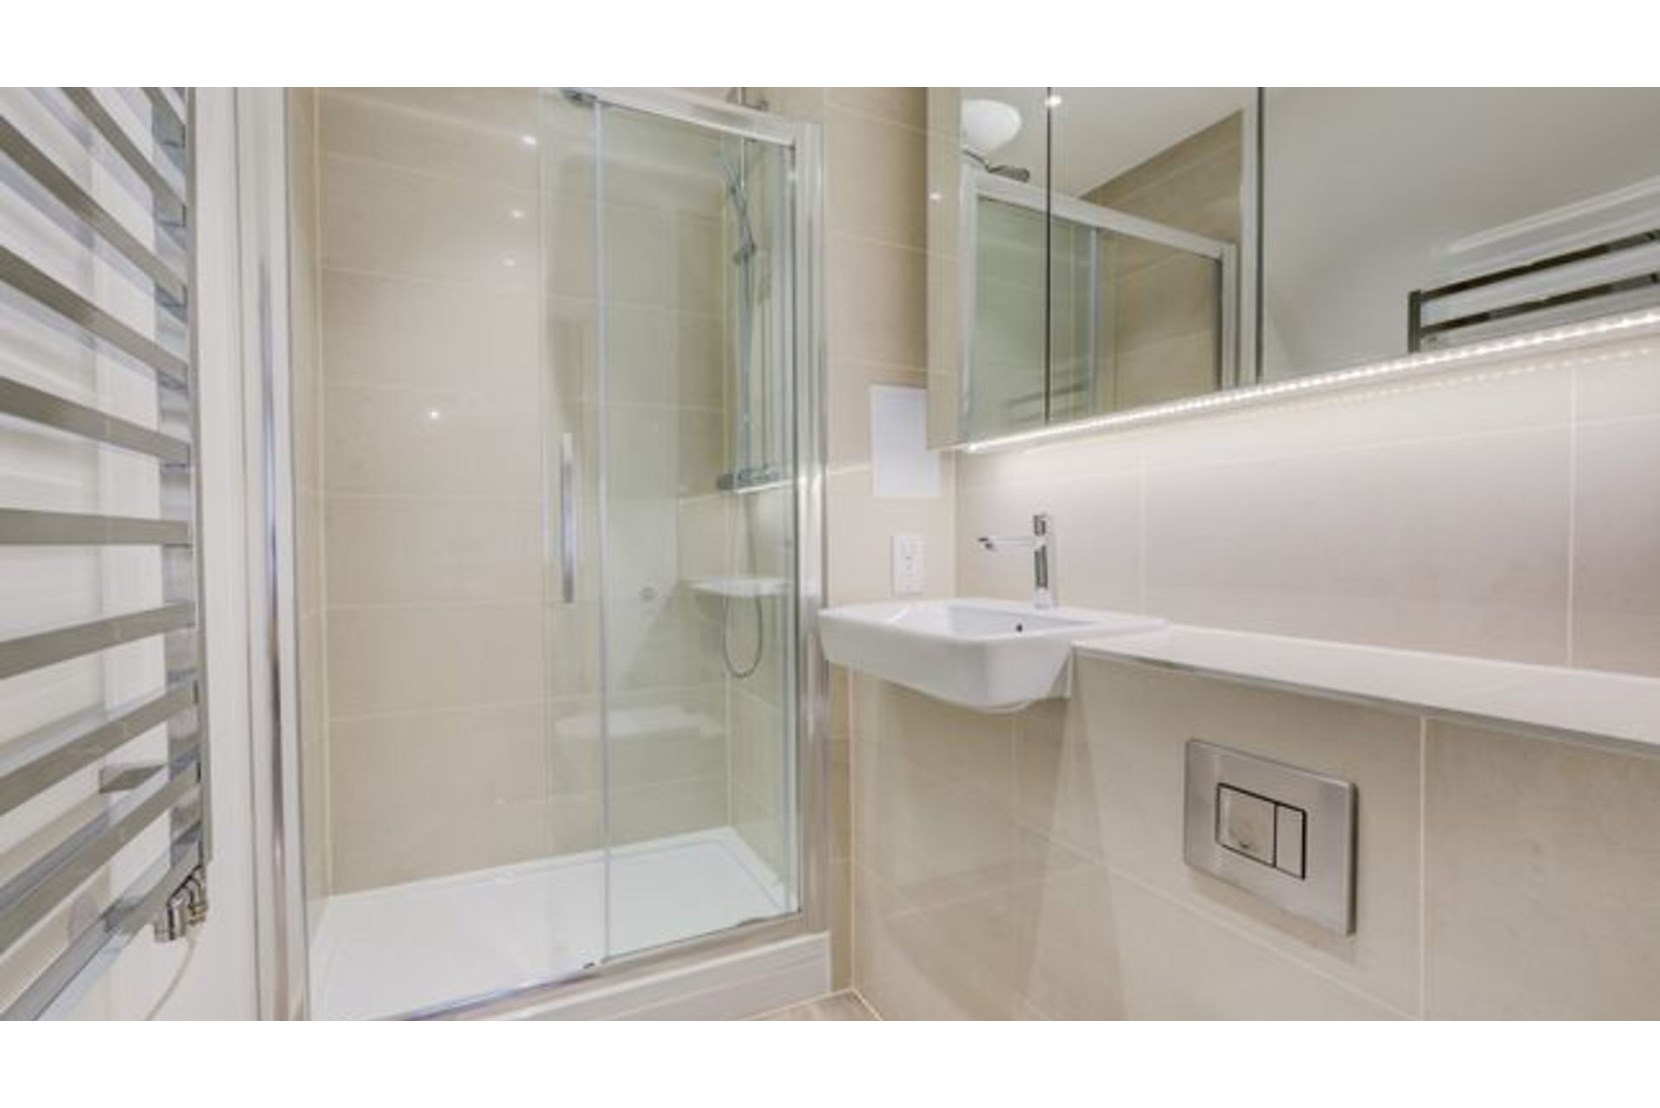 Apartments to Rent by Hera at Hornchurch, Havering, RM11, bathroom